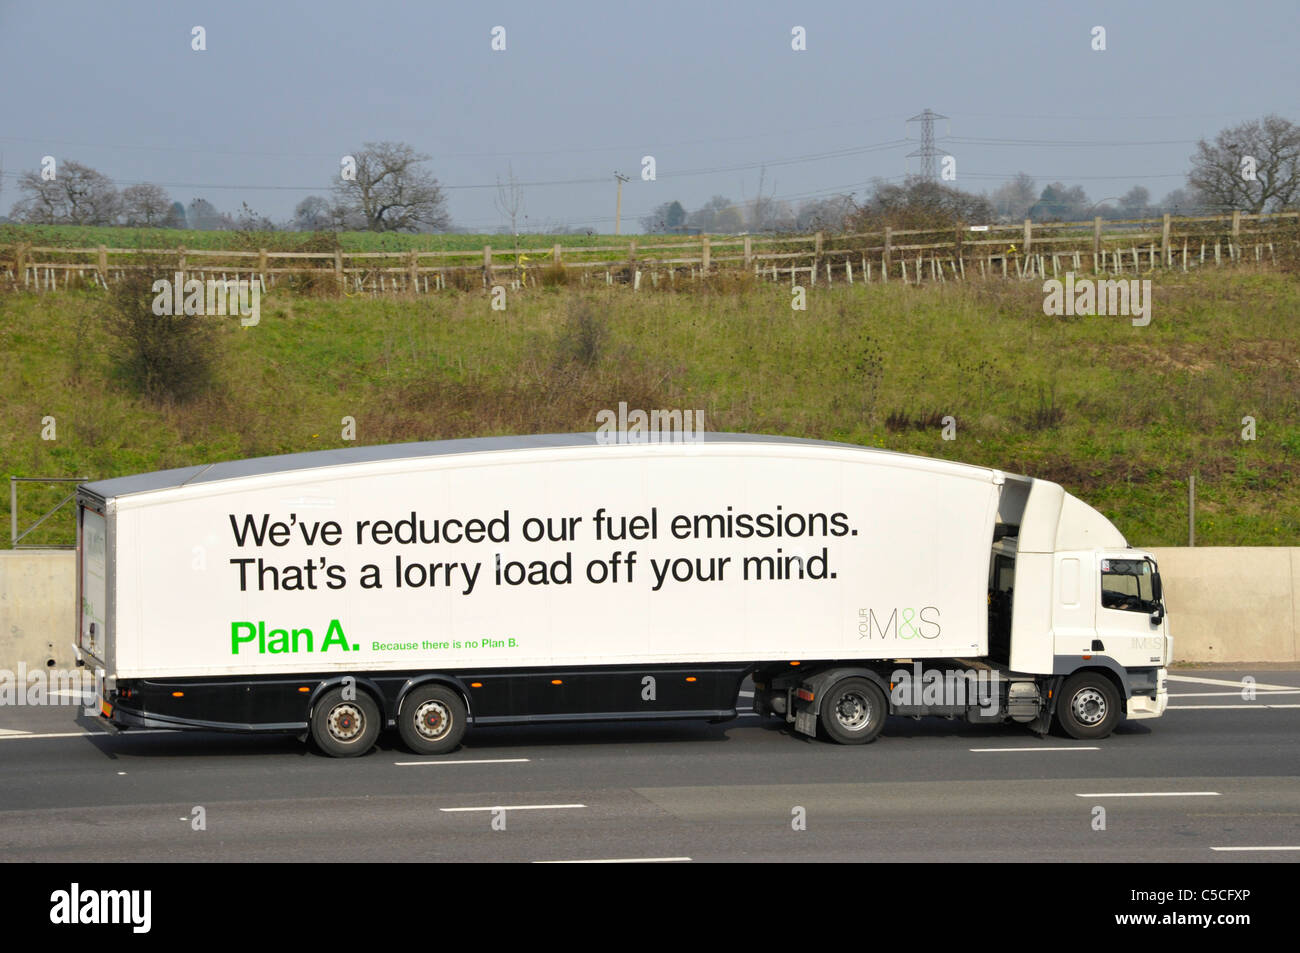 Side view of M&S hgv supply chain distribution delivery lorry truck & aerodynamic shape on articulated trailer Plan A fuel emissions advert on UK road Stock Photo